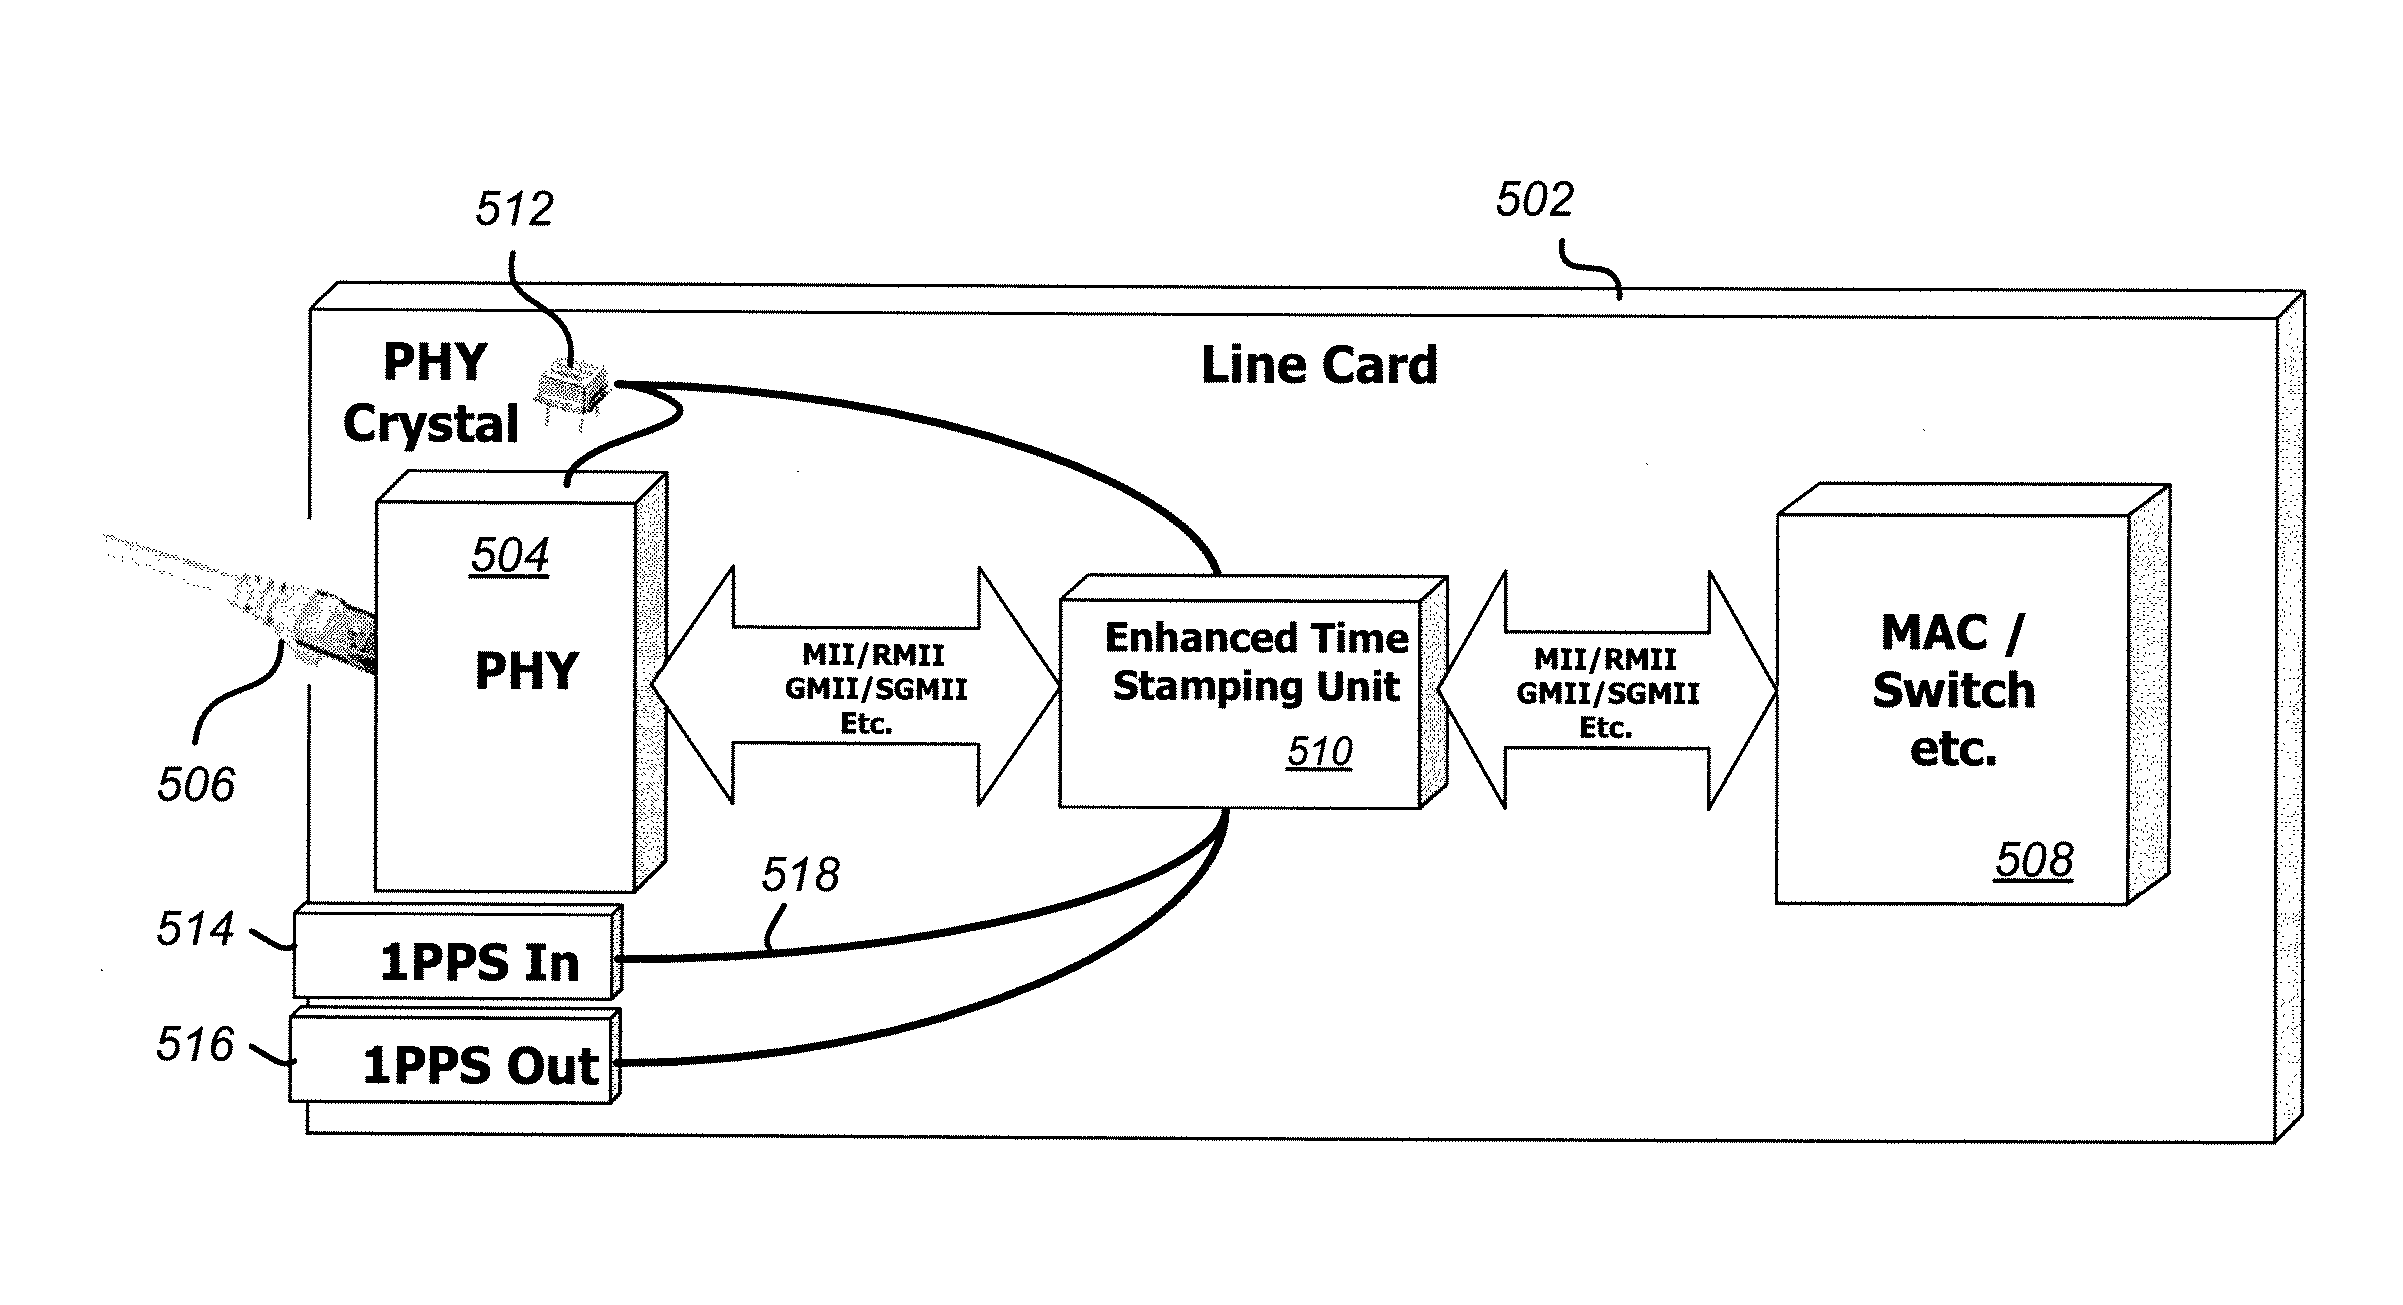 Measurement and adjustment of real-time values according to residence time in networking equipment without access to real time